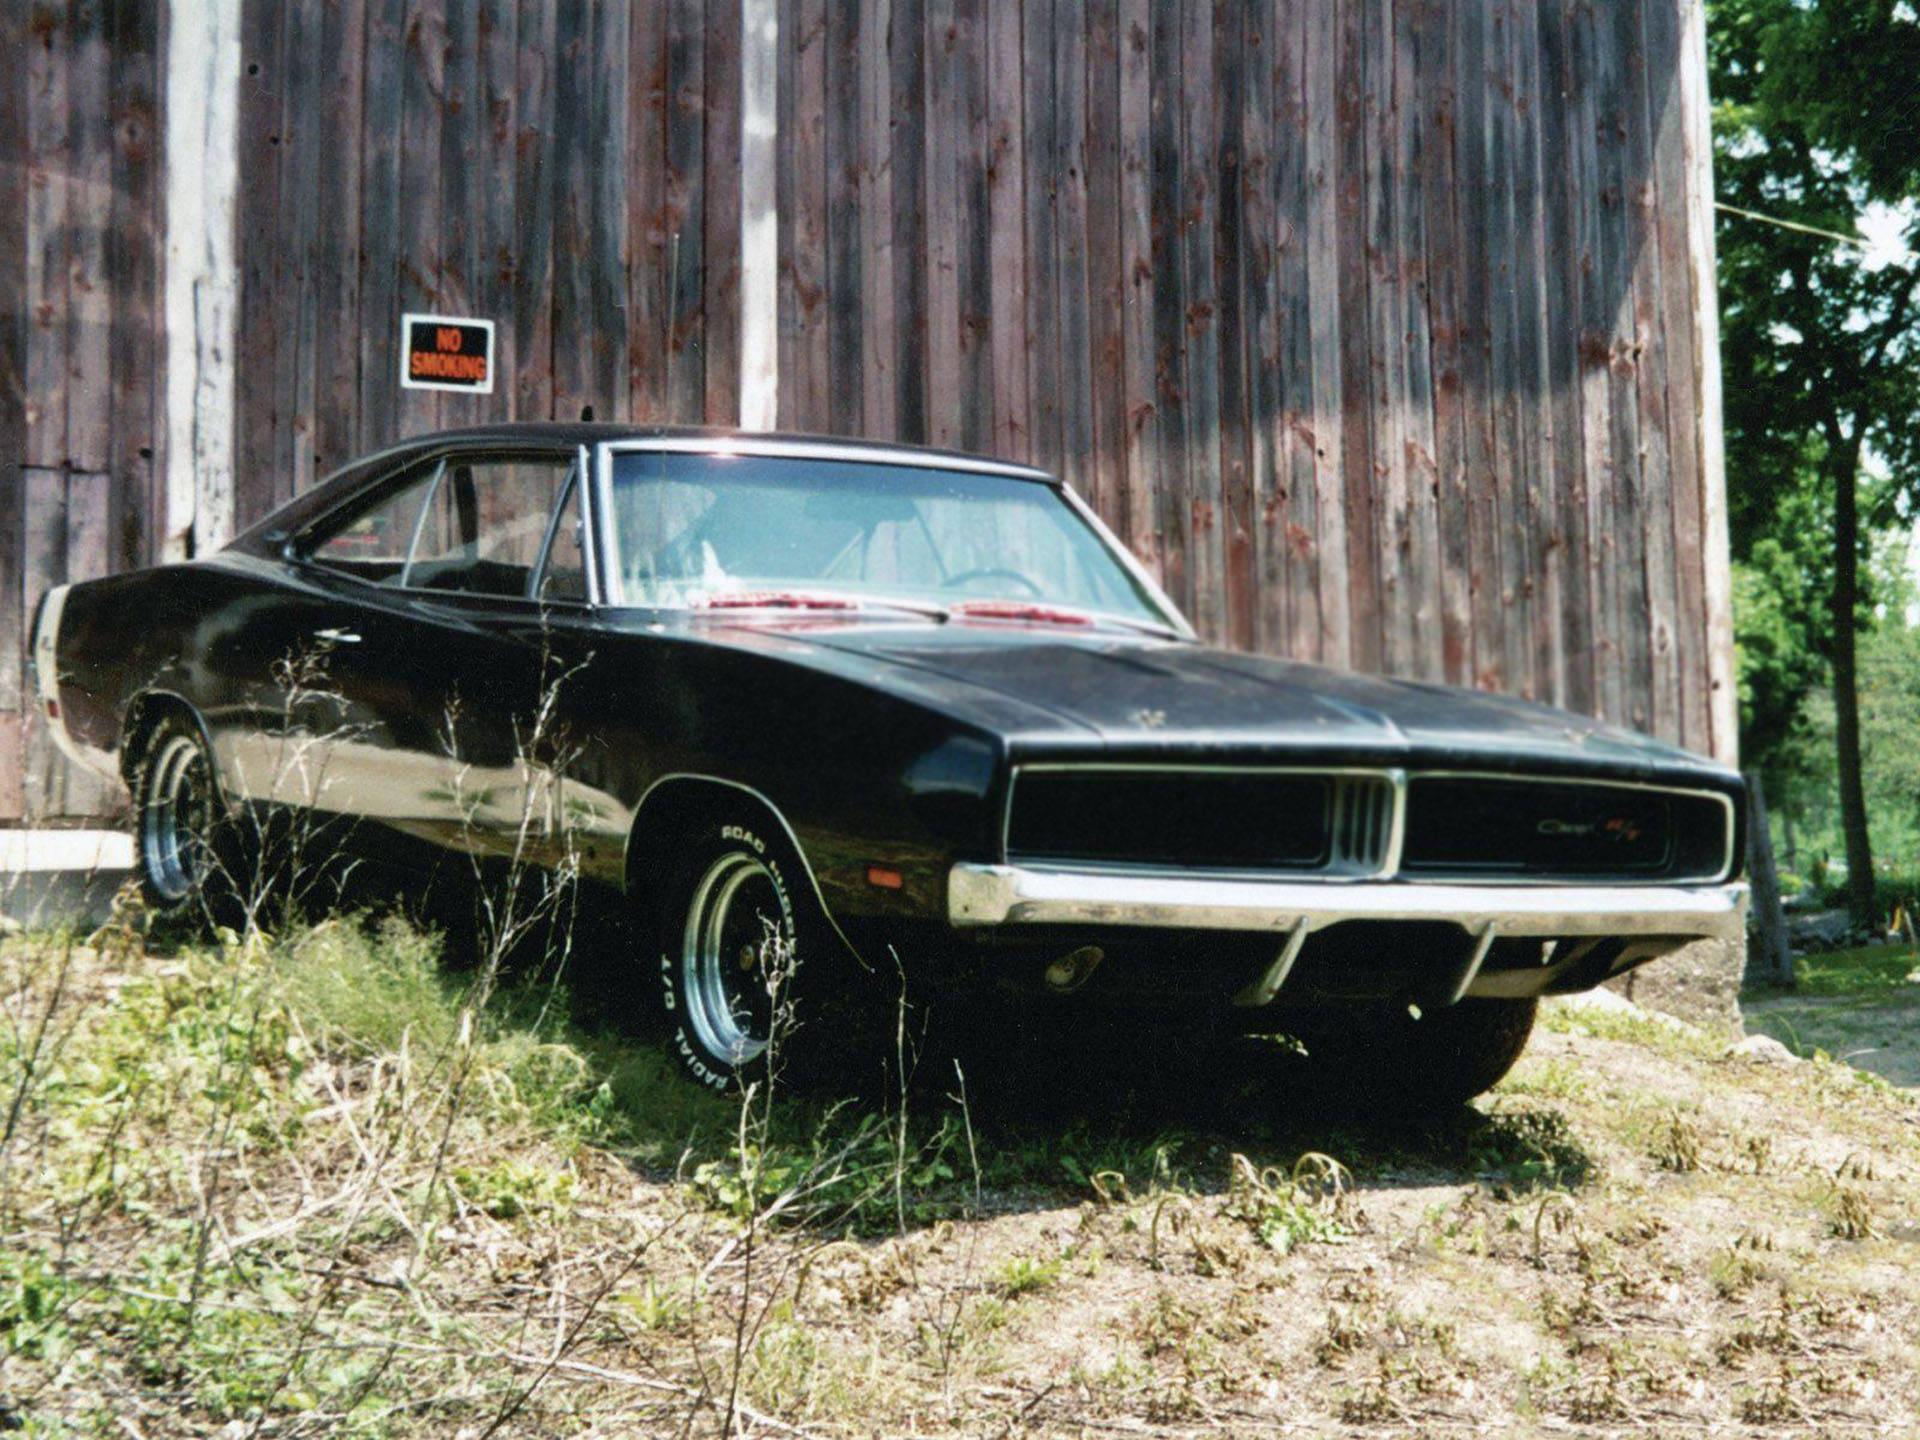 1969 Dodge Charger Near Barn Background